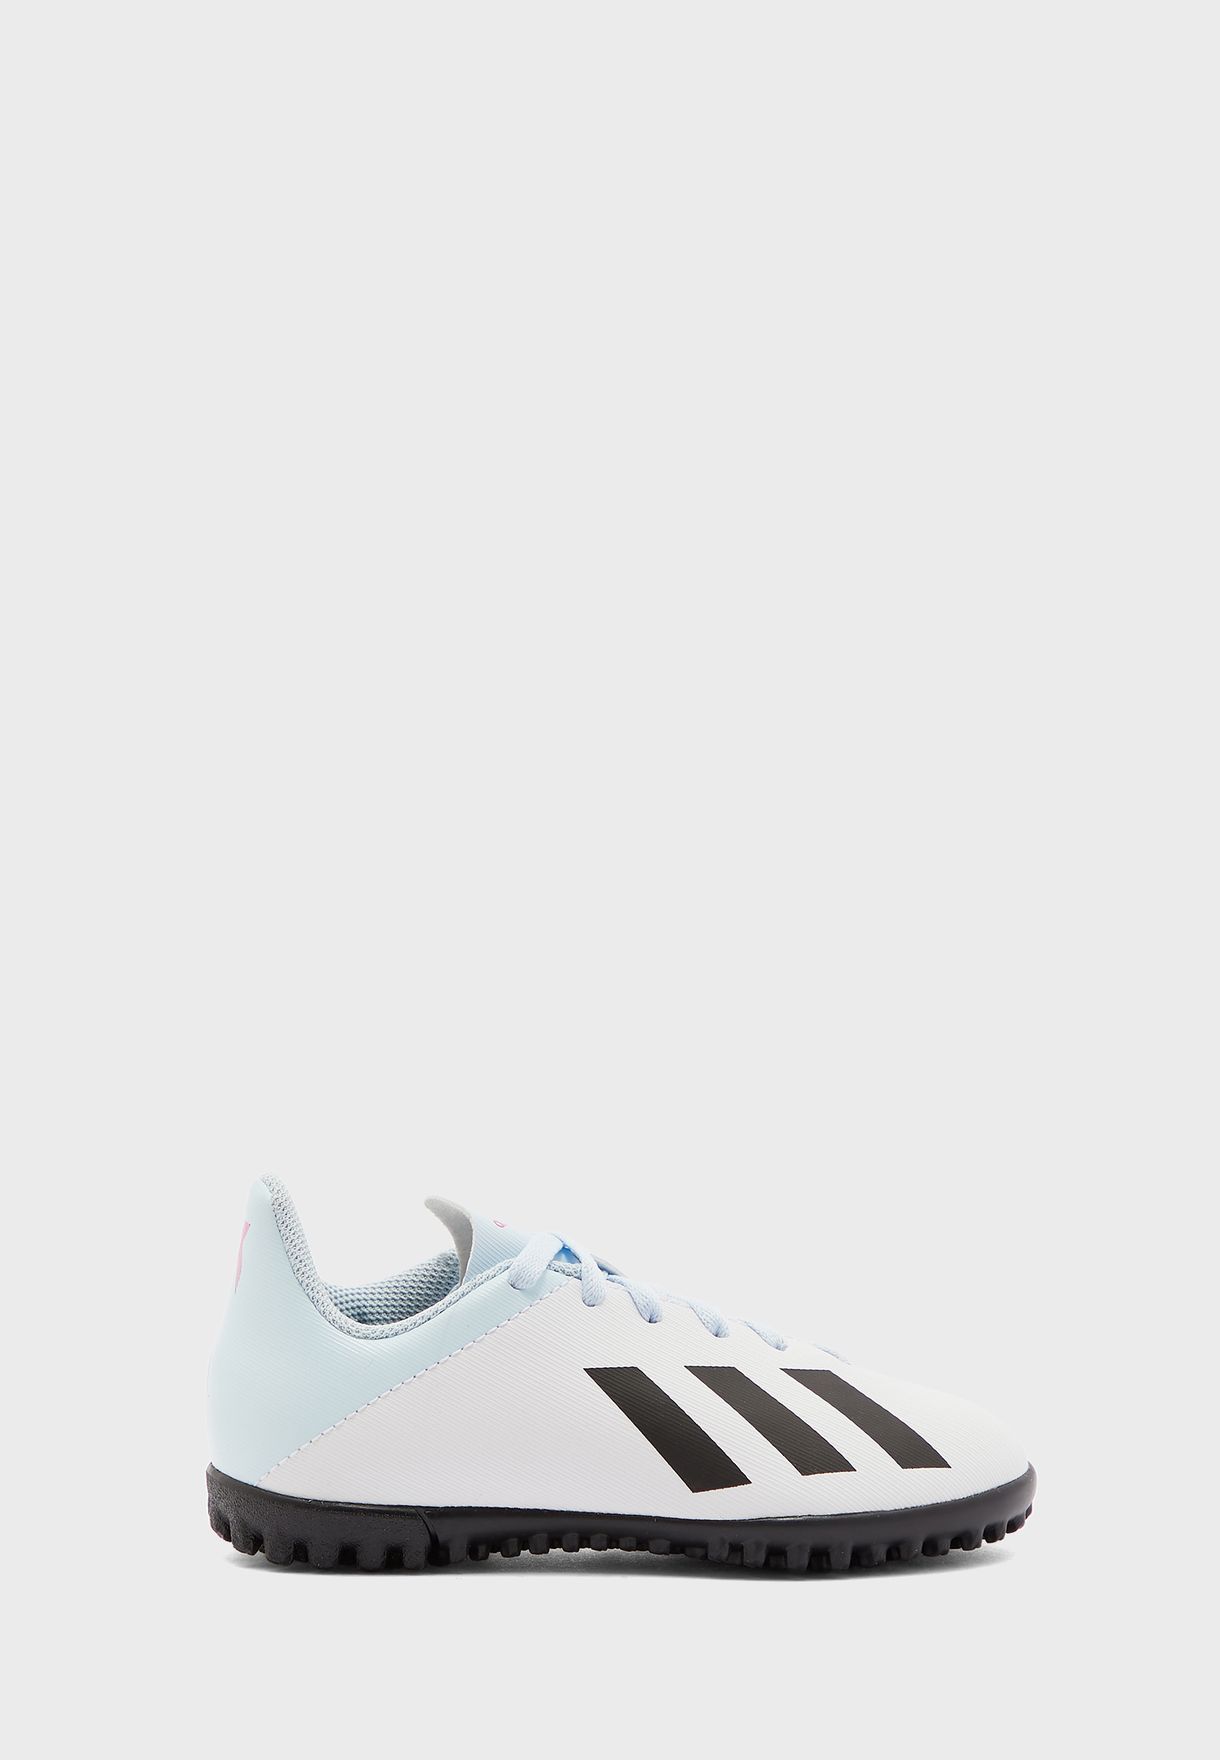 adidas white shoes for kids